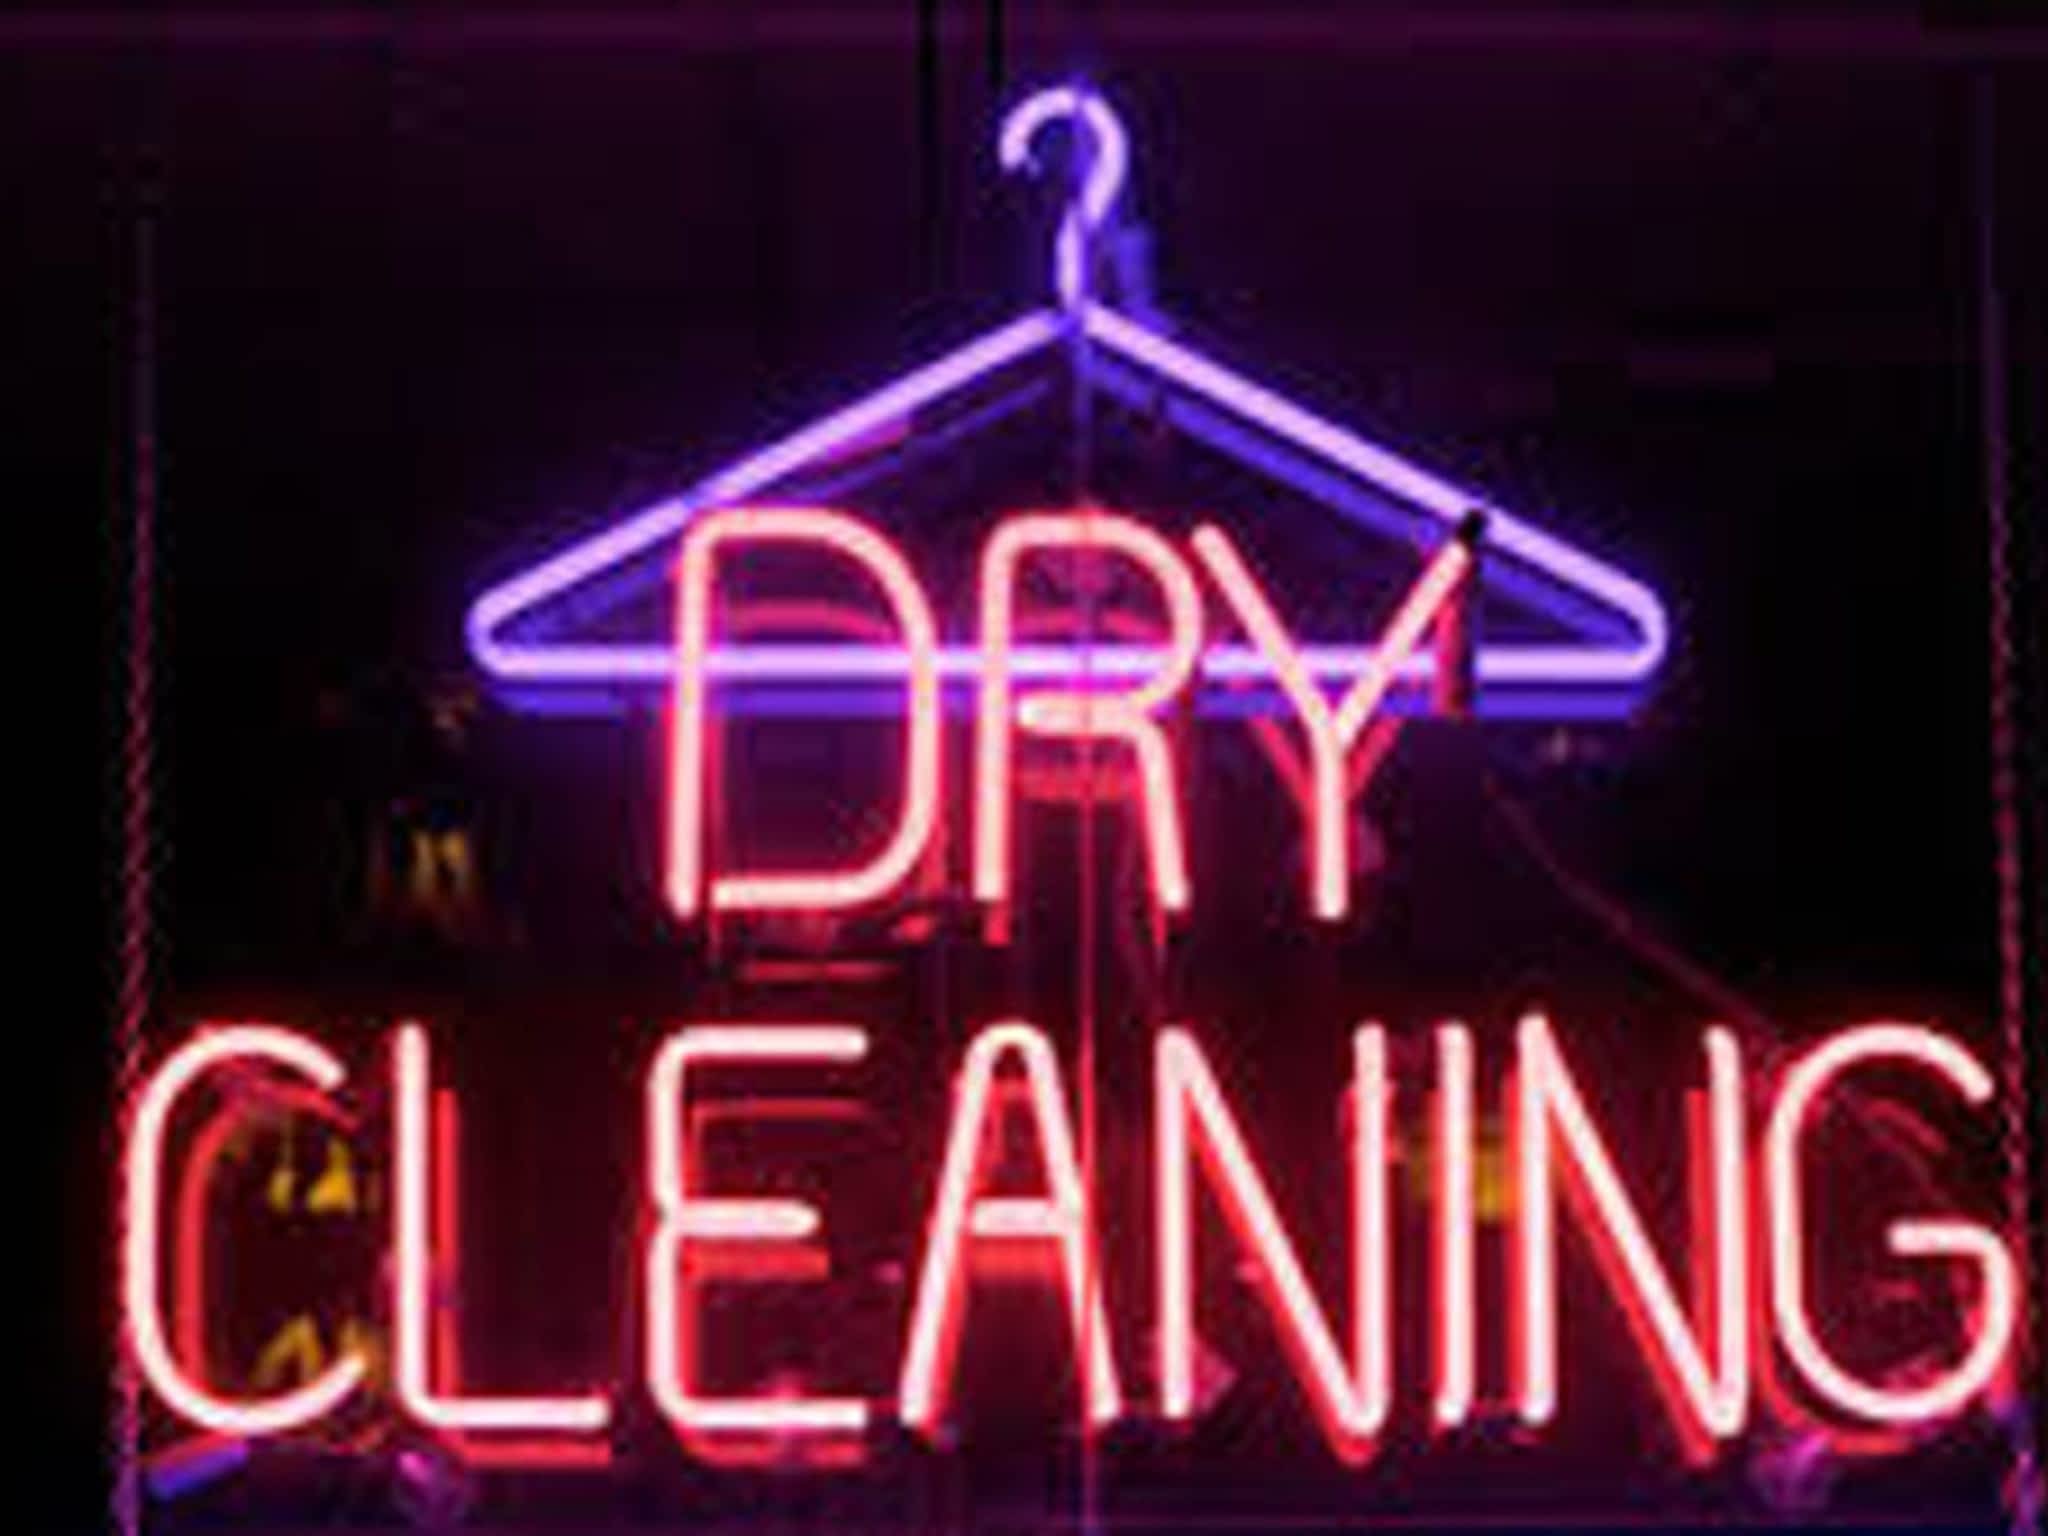 photo Quality Care Dry Cleaning Services/Wash & Fold/A lterations